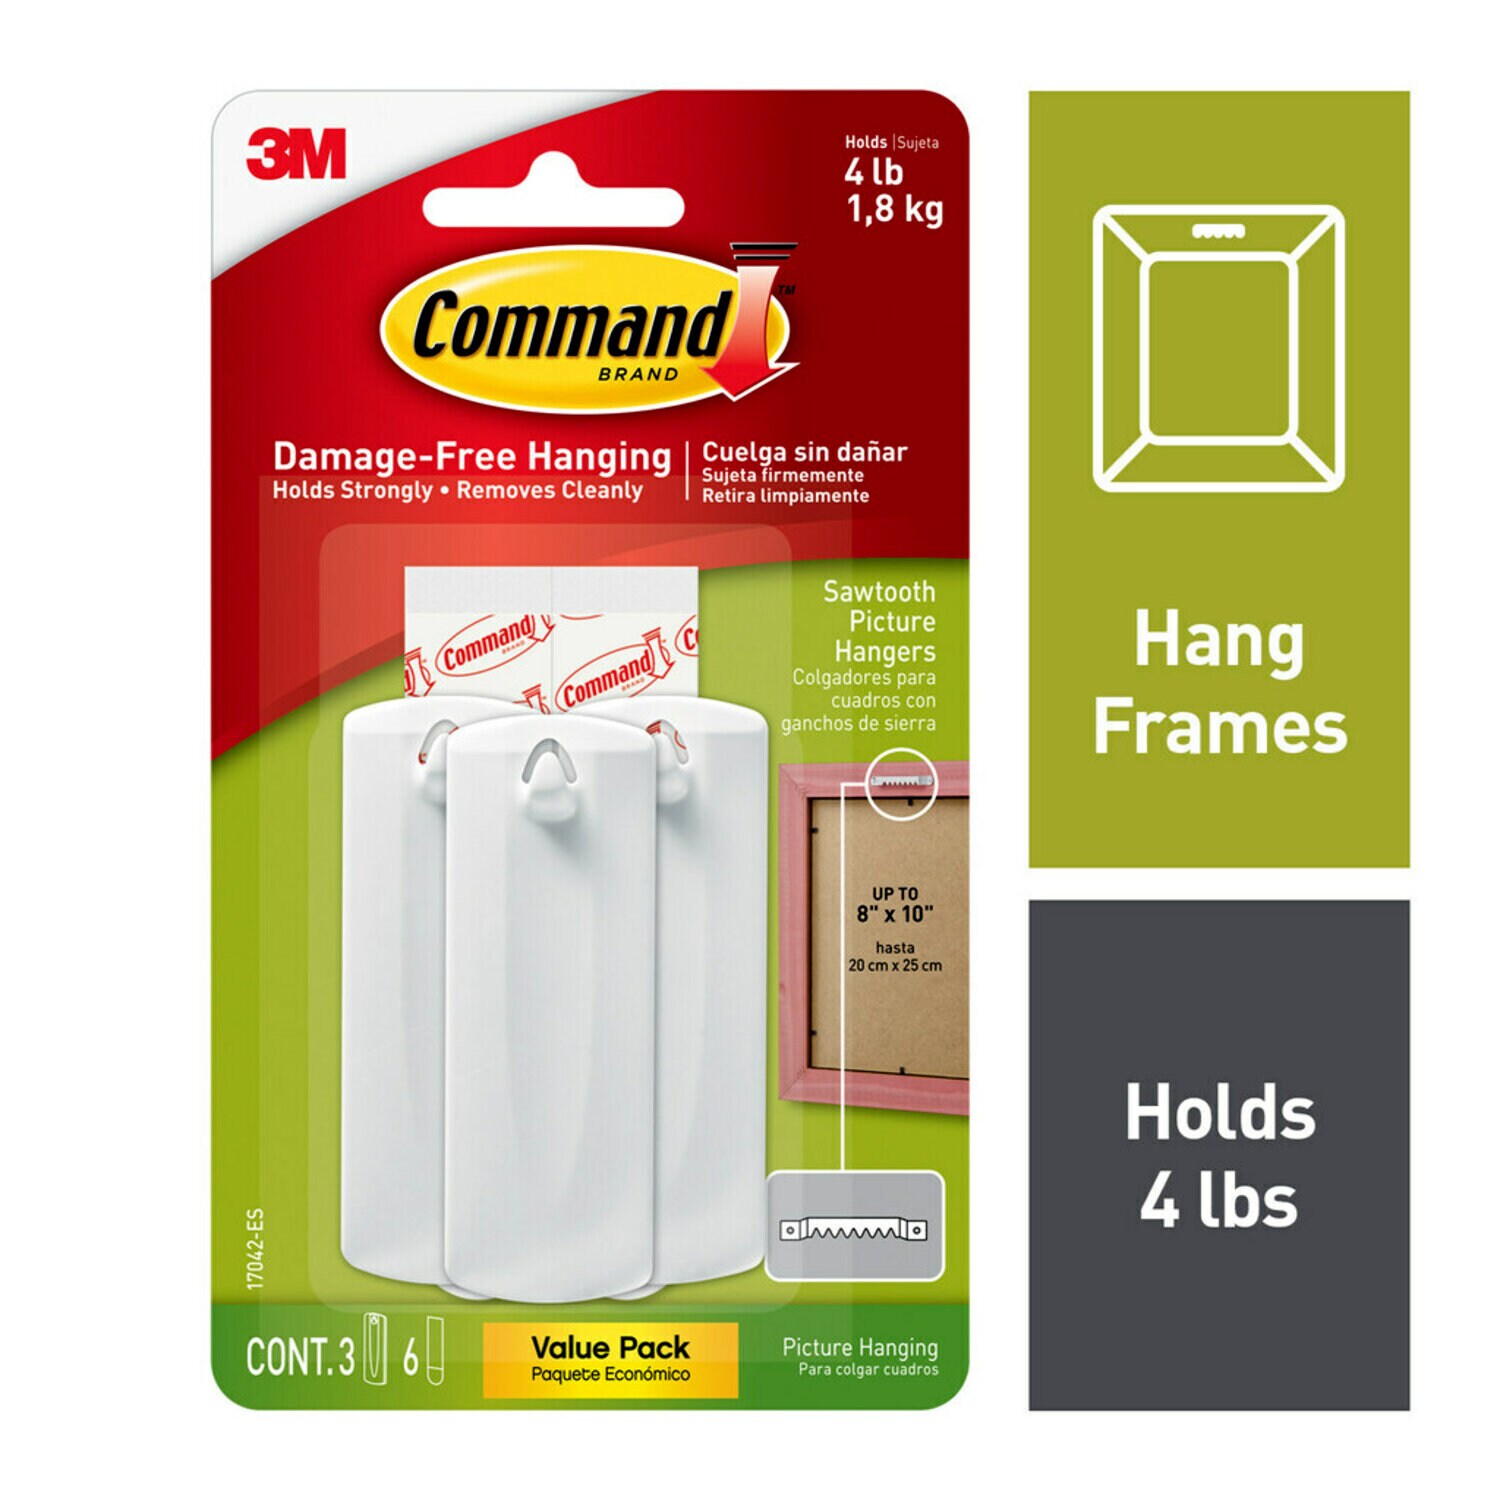 7100217206 - Command Sawtooth Picture Hangers Value Pack 17042-ES, 3 hangers, 6 strips